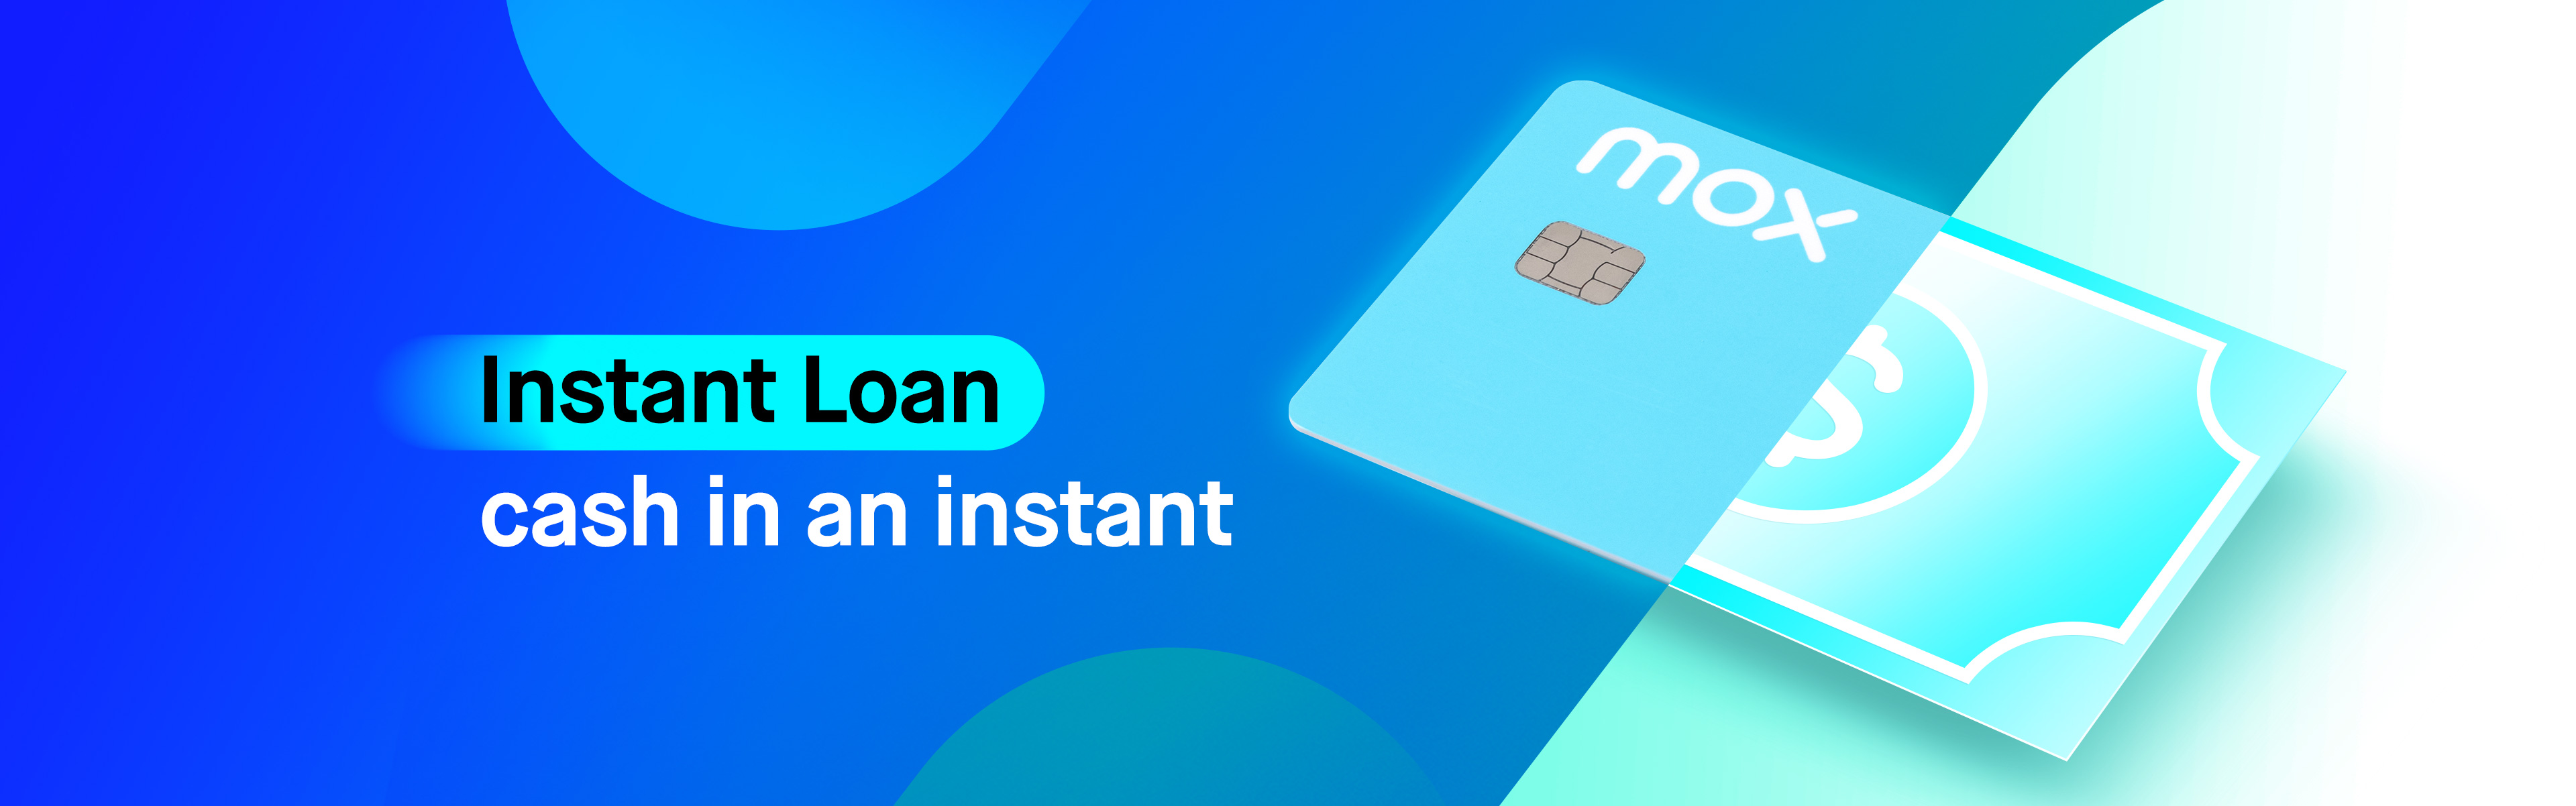 Earn up to HKD1,500 with Instant Loan, APR as low as 1.04%*